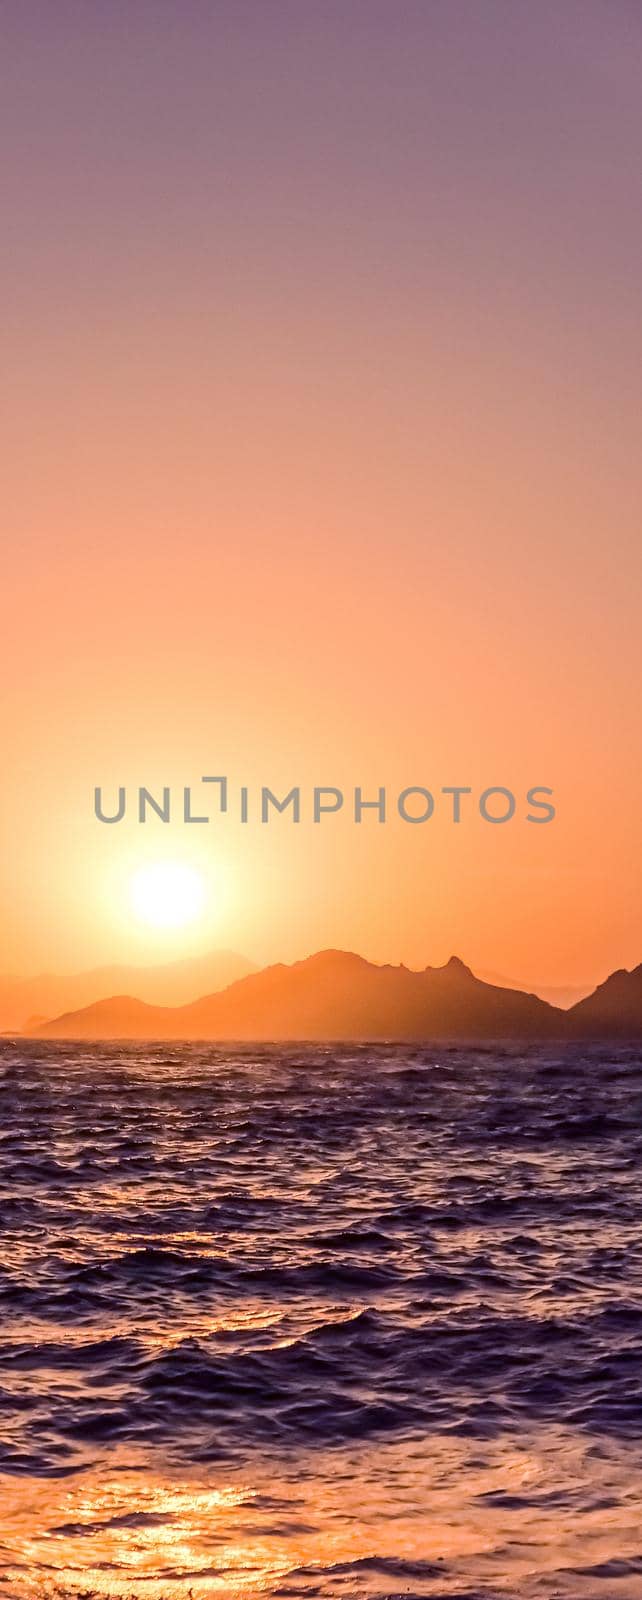 Nature, twilight and vintage beach holiday concept - Summer sunset at the Mediterranean sea coast, seascape and mountain view